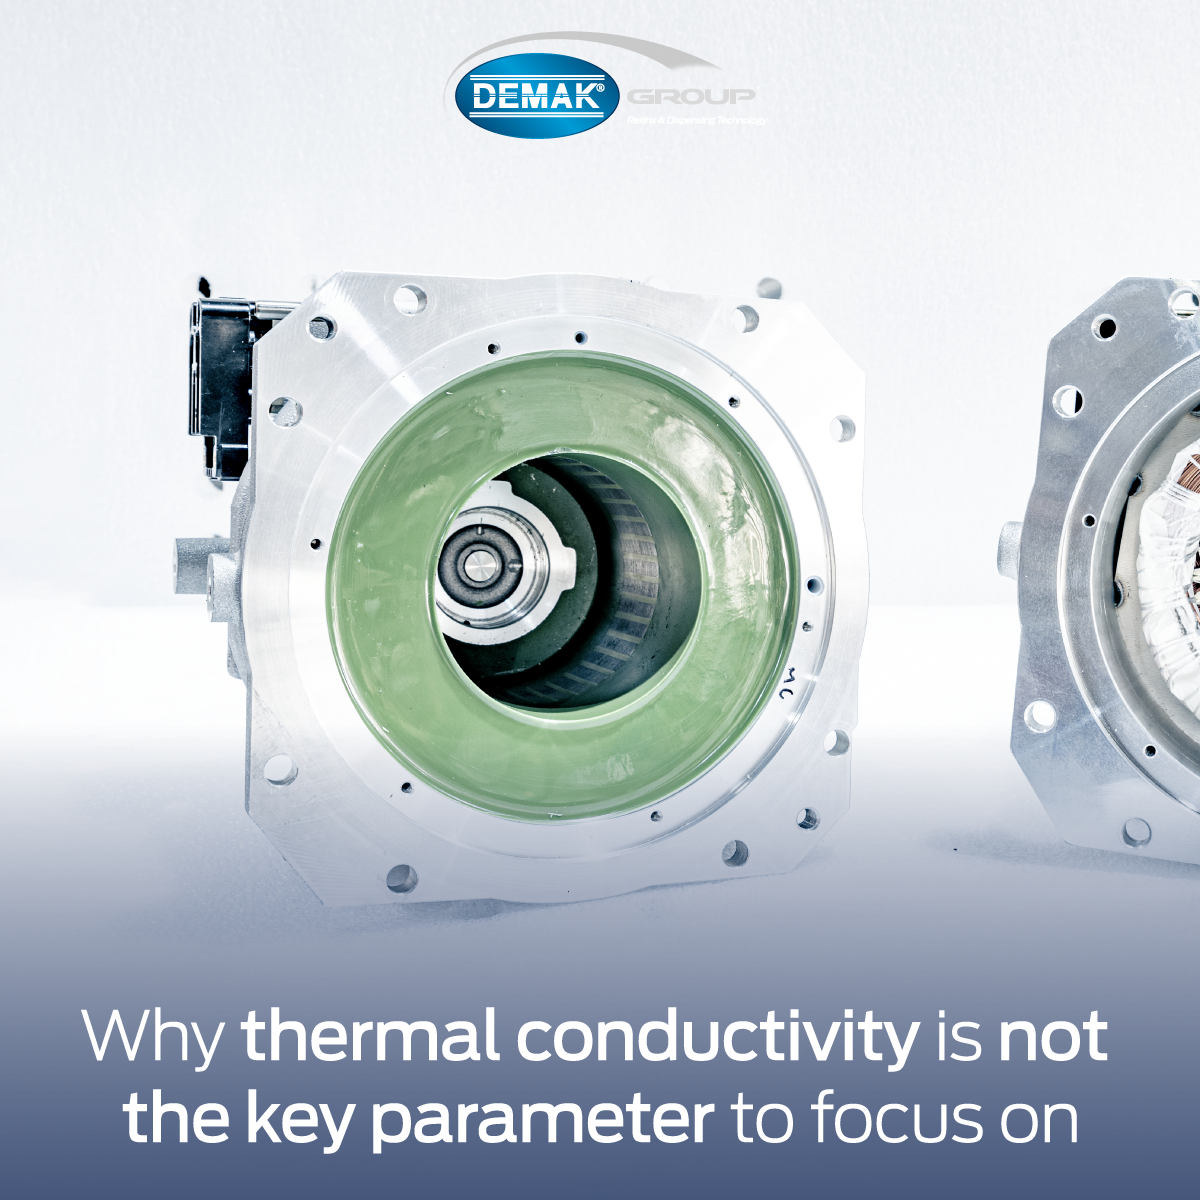 Why thermal conductivity is not the key parameter to focus on